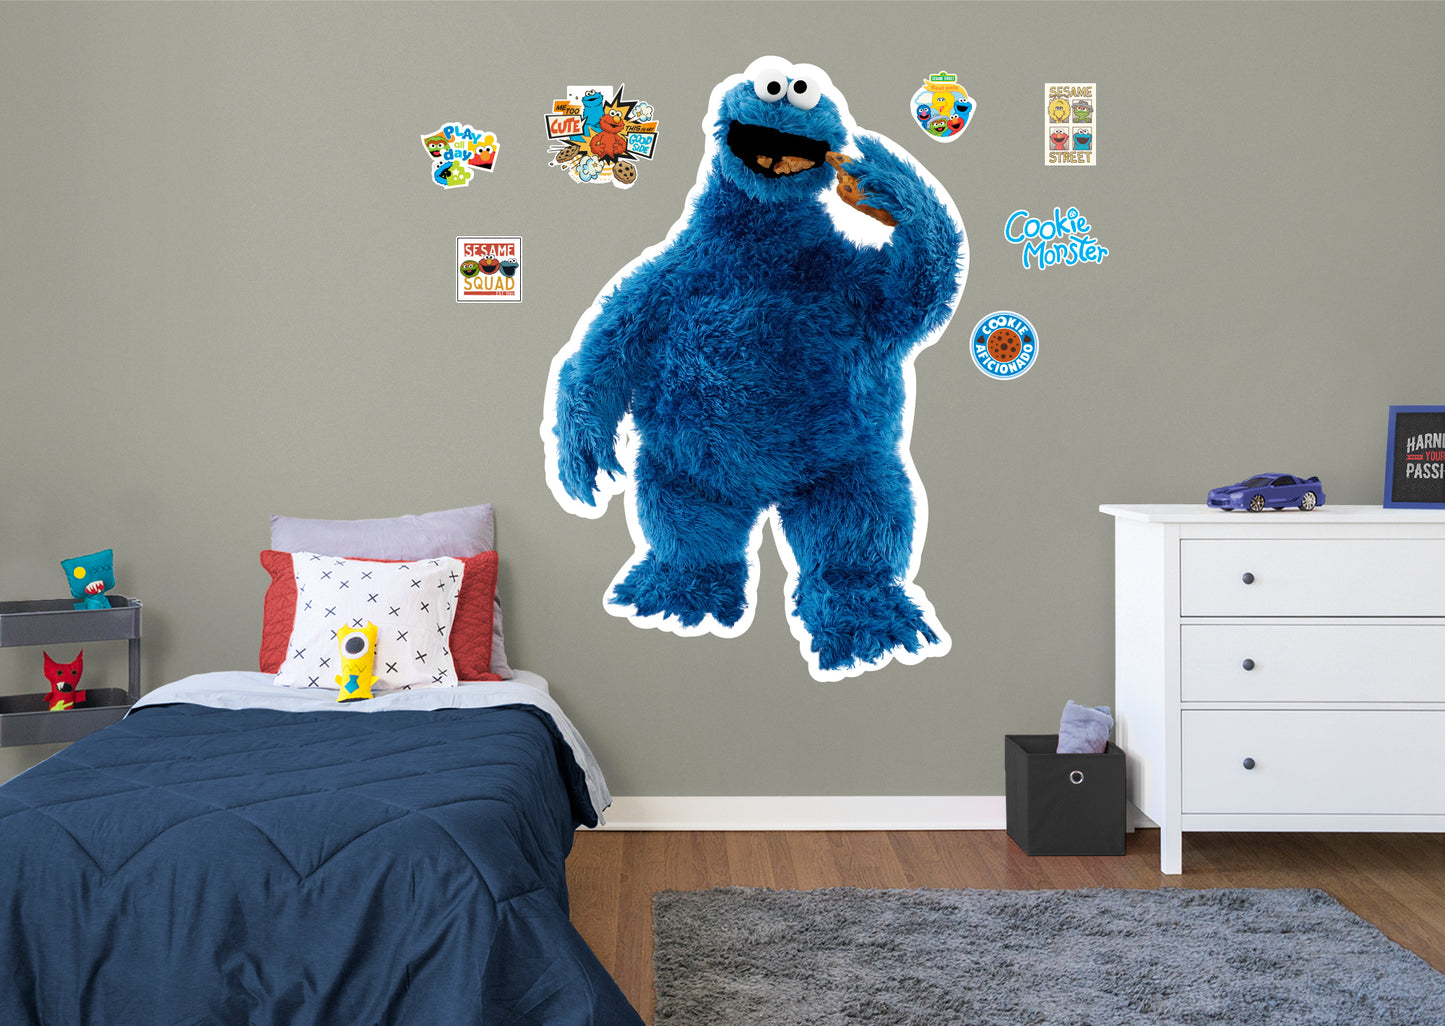 Cookie Monster RealBig        - Officially Licensed Sesame Street Removable     Adhesive Decal